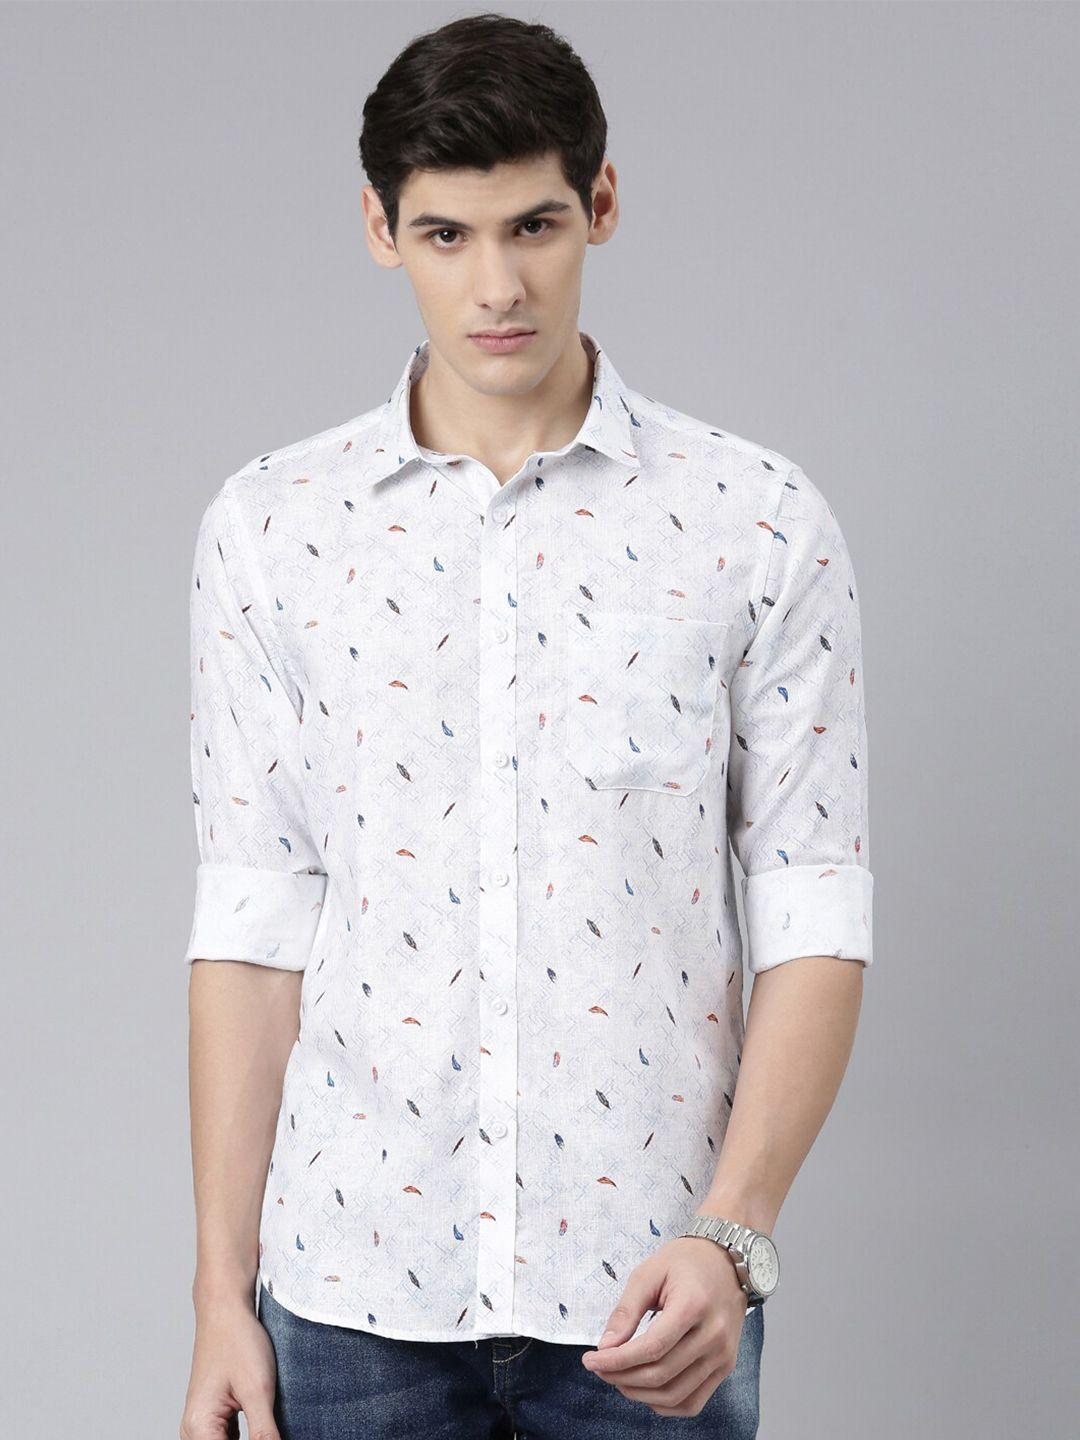 chennis classic slim fit printed linen cotton casual shirt